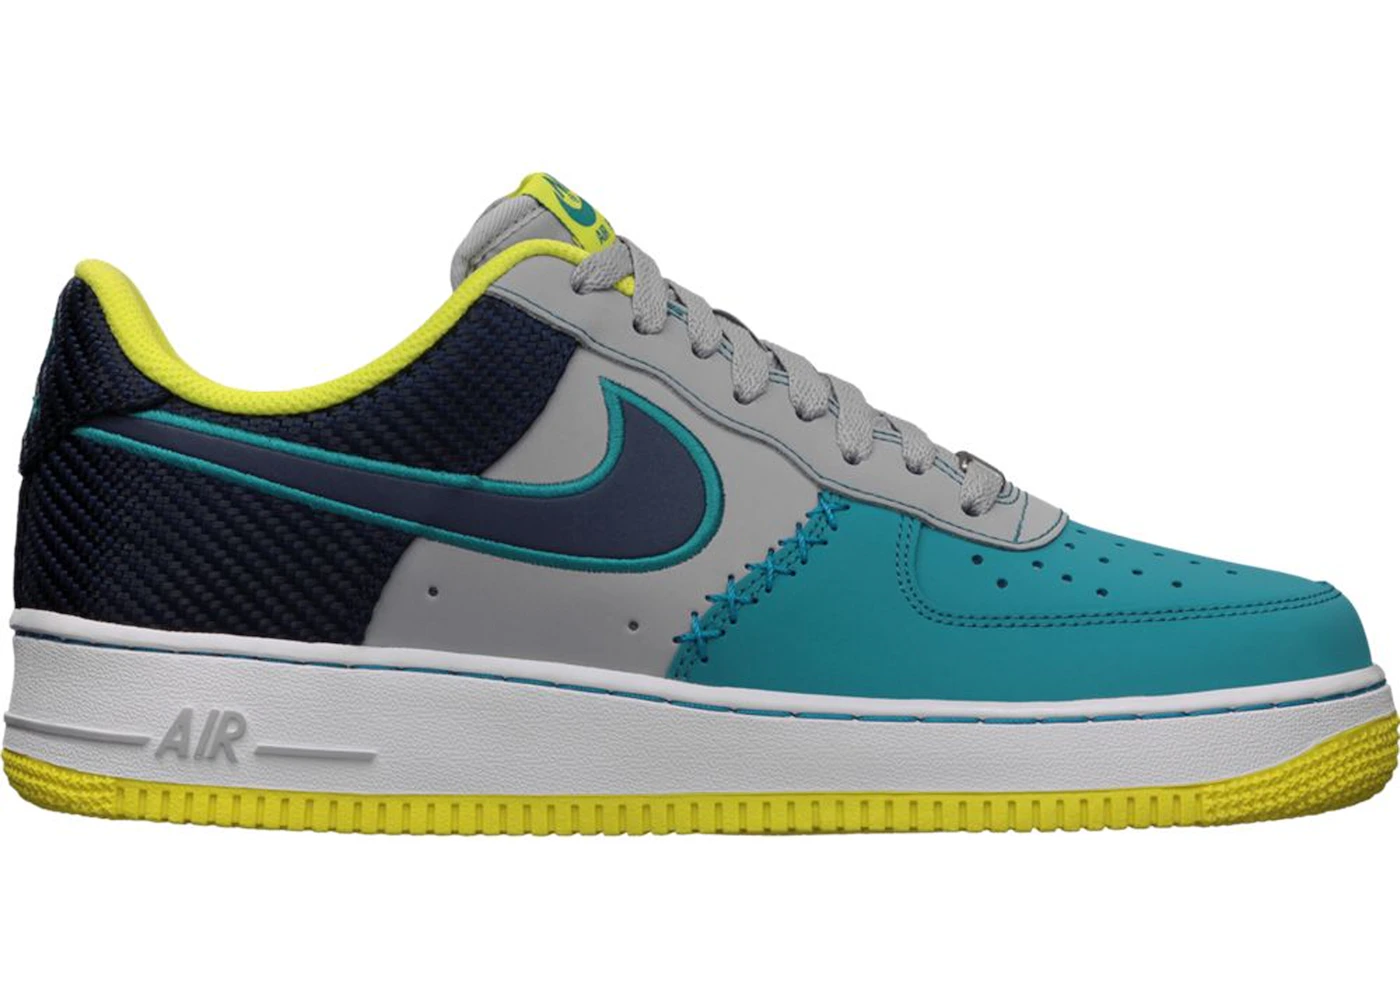 Nike Air Force 1 Low Wolf Grey Midnight Navy Tropical Teal Men's 